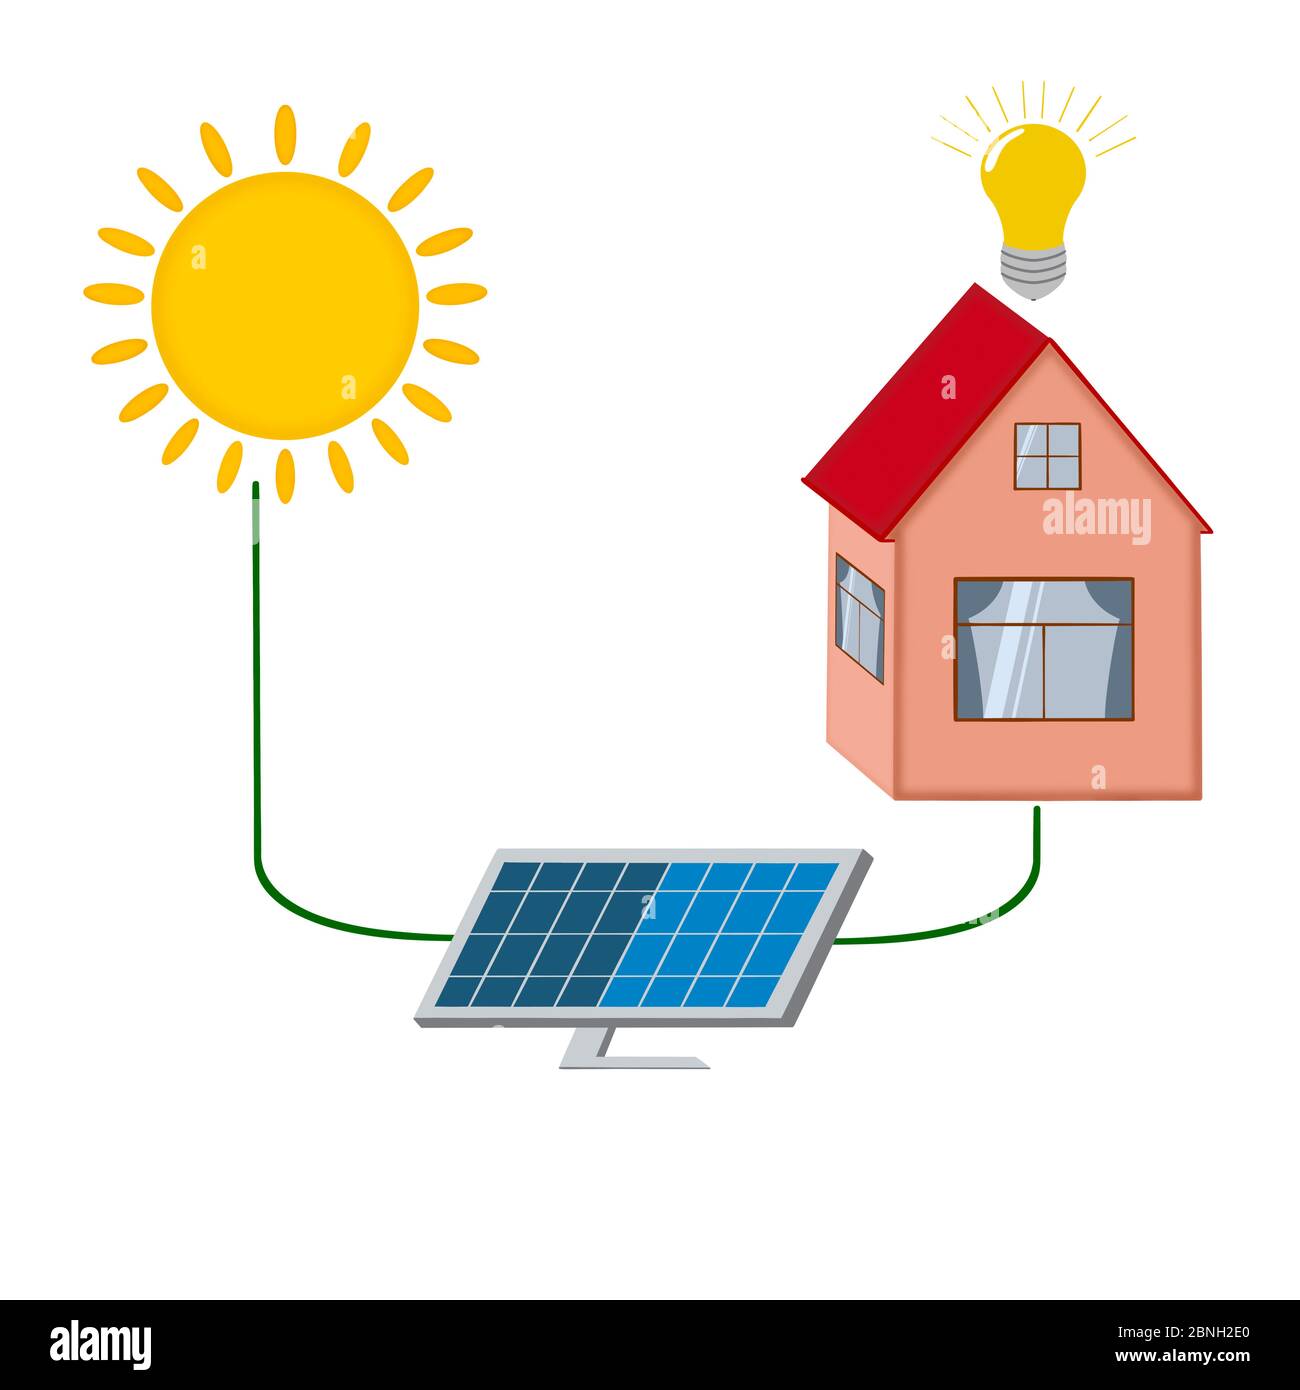 Home solar energy system concept. Diagram with sun, photovoltaic cell panel  and house. Flat style illustration Stock Photo - Alamy